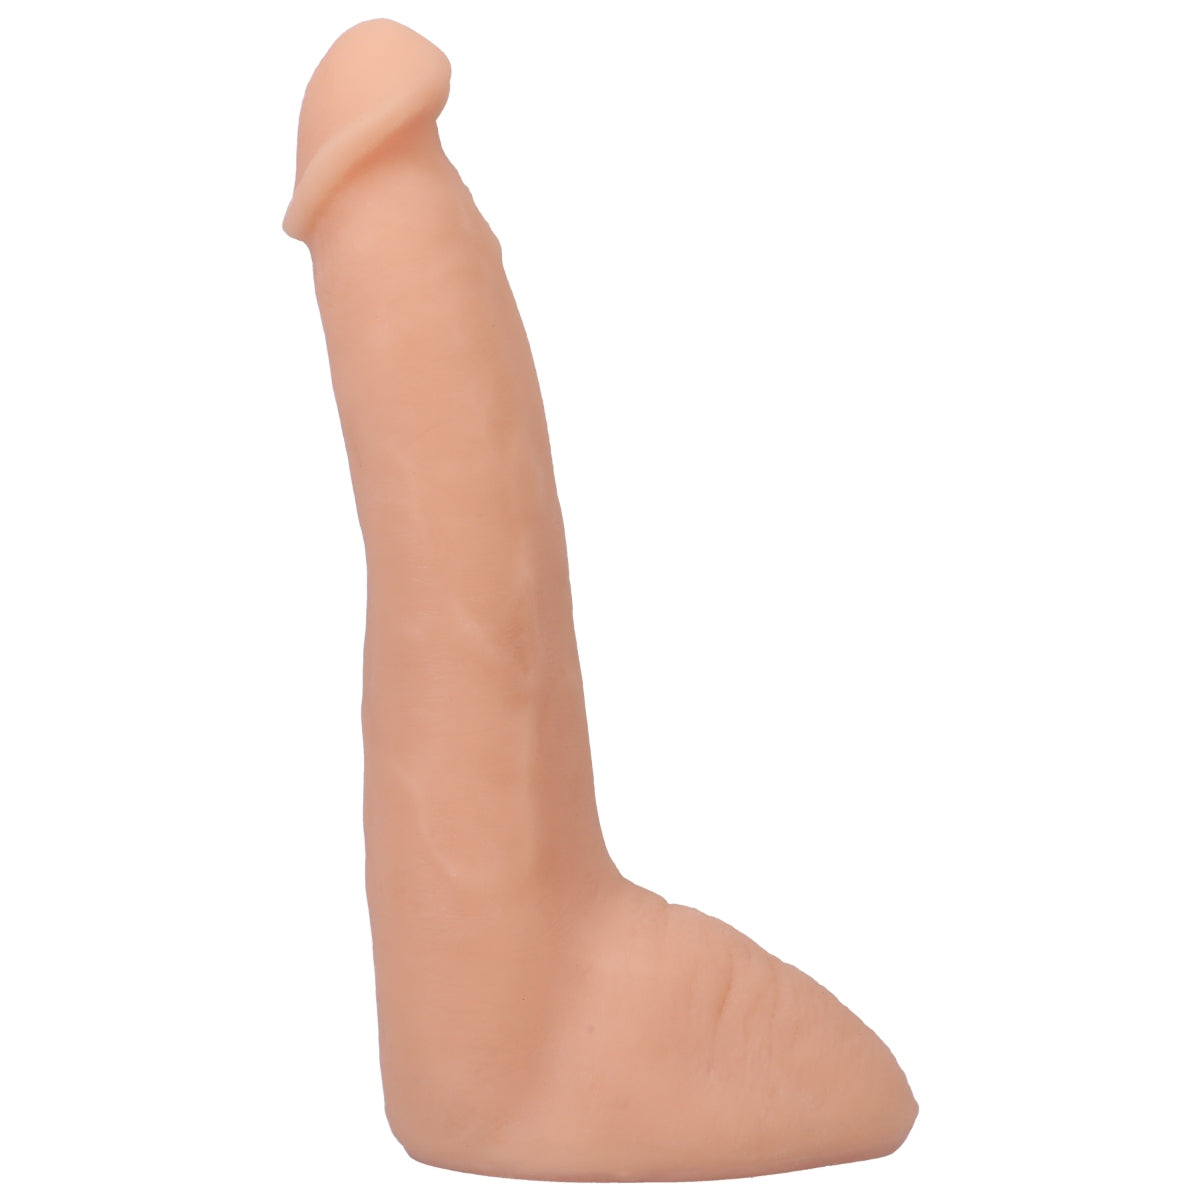 Signature Cocks | Roman Todd 8Inch Ultraskyn Cock with Removable Vac U Lock Suction Cup – Vanilla